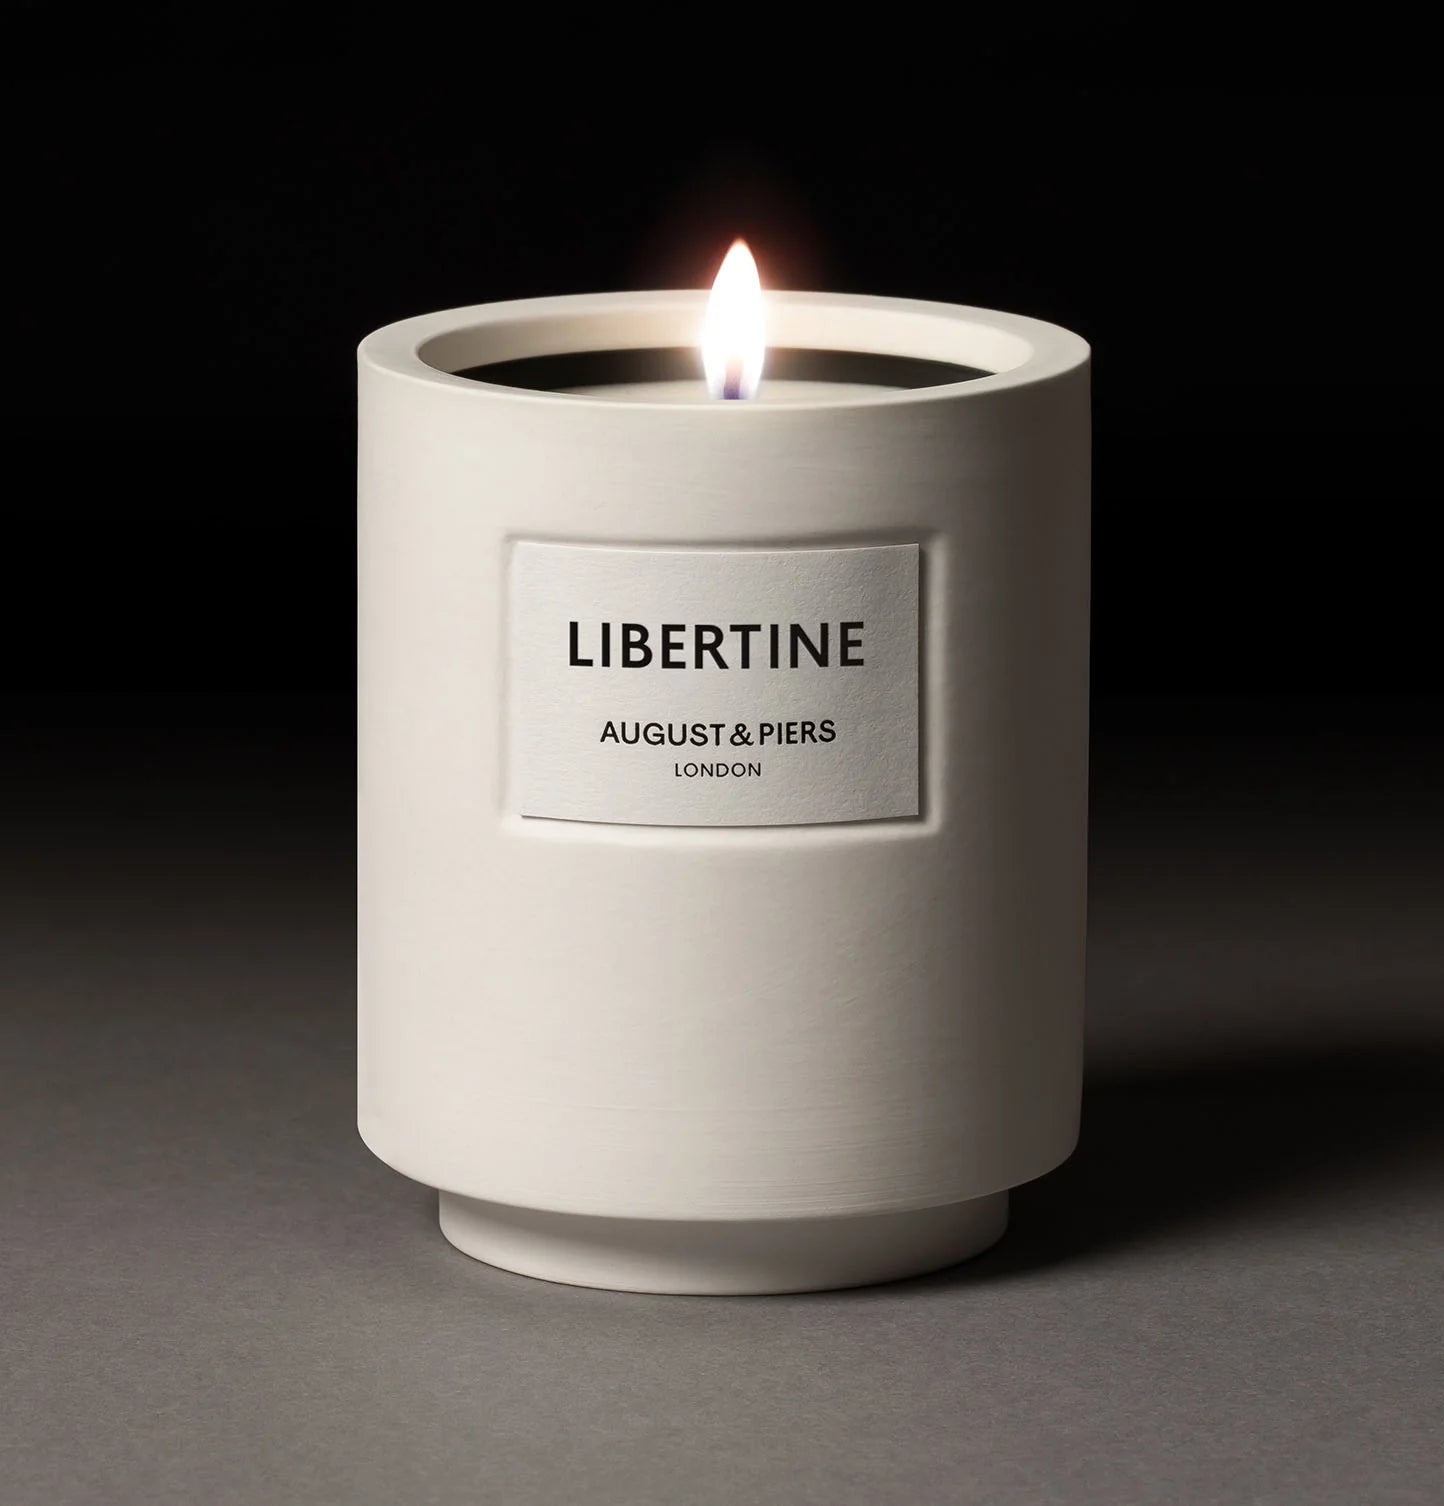 August & Piers Libertine Candle - Stèle